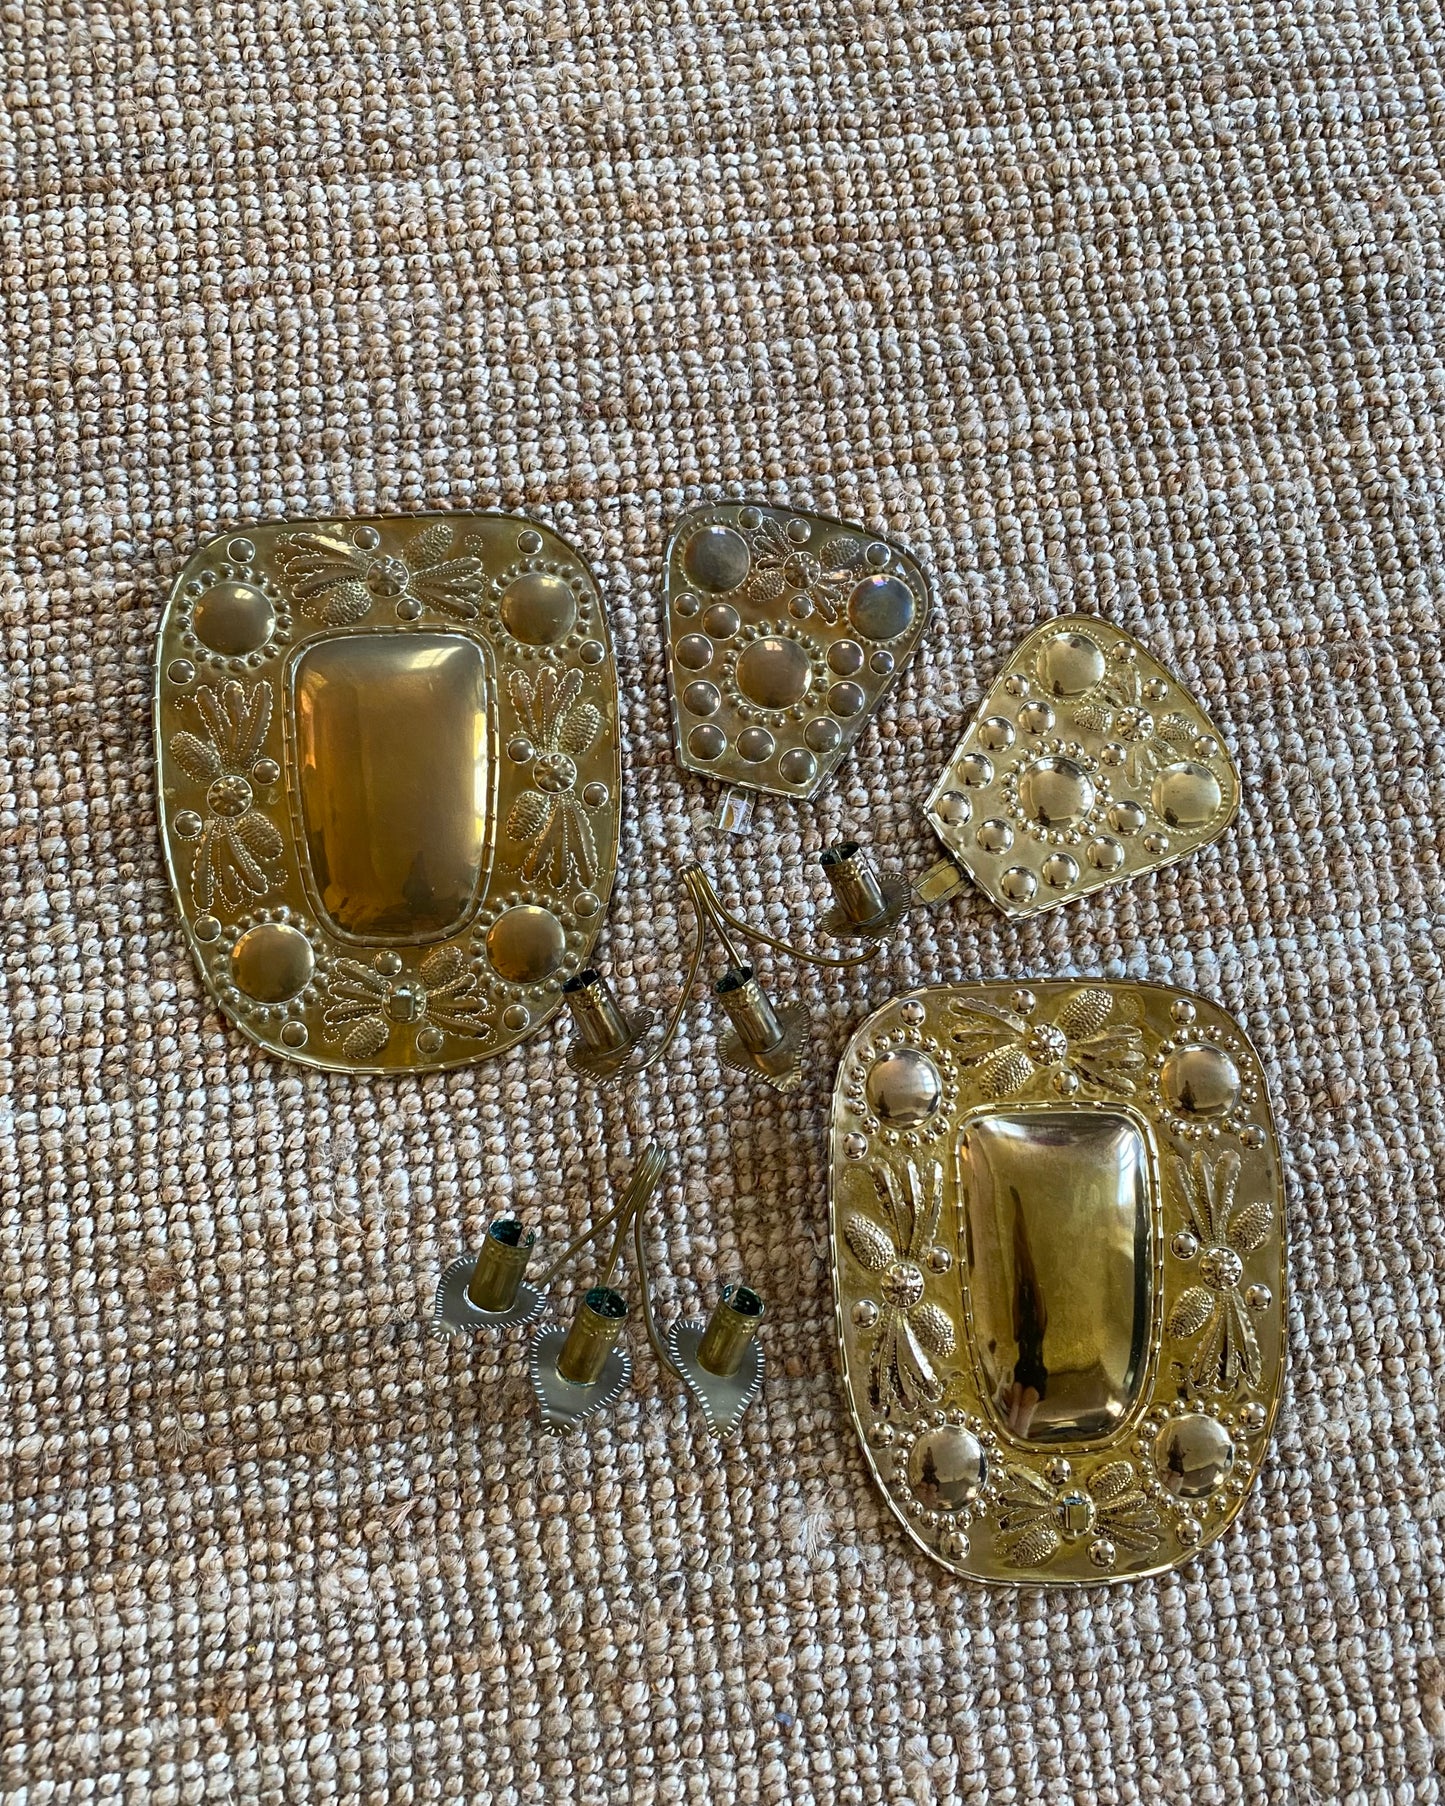 Pair of three - armed brass wall sconces